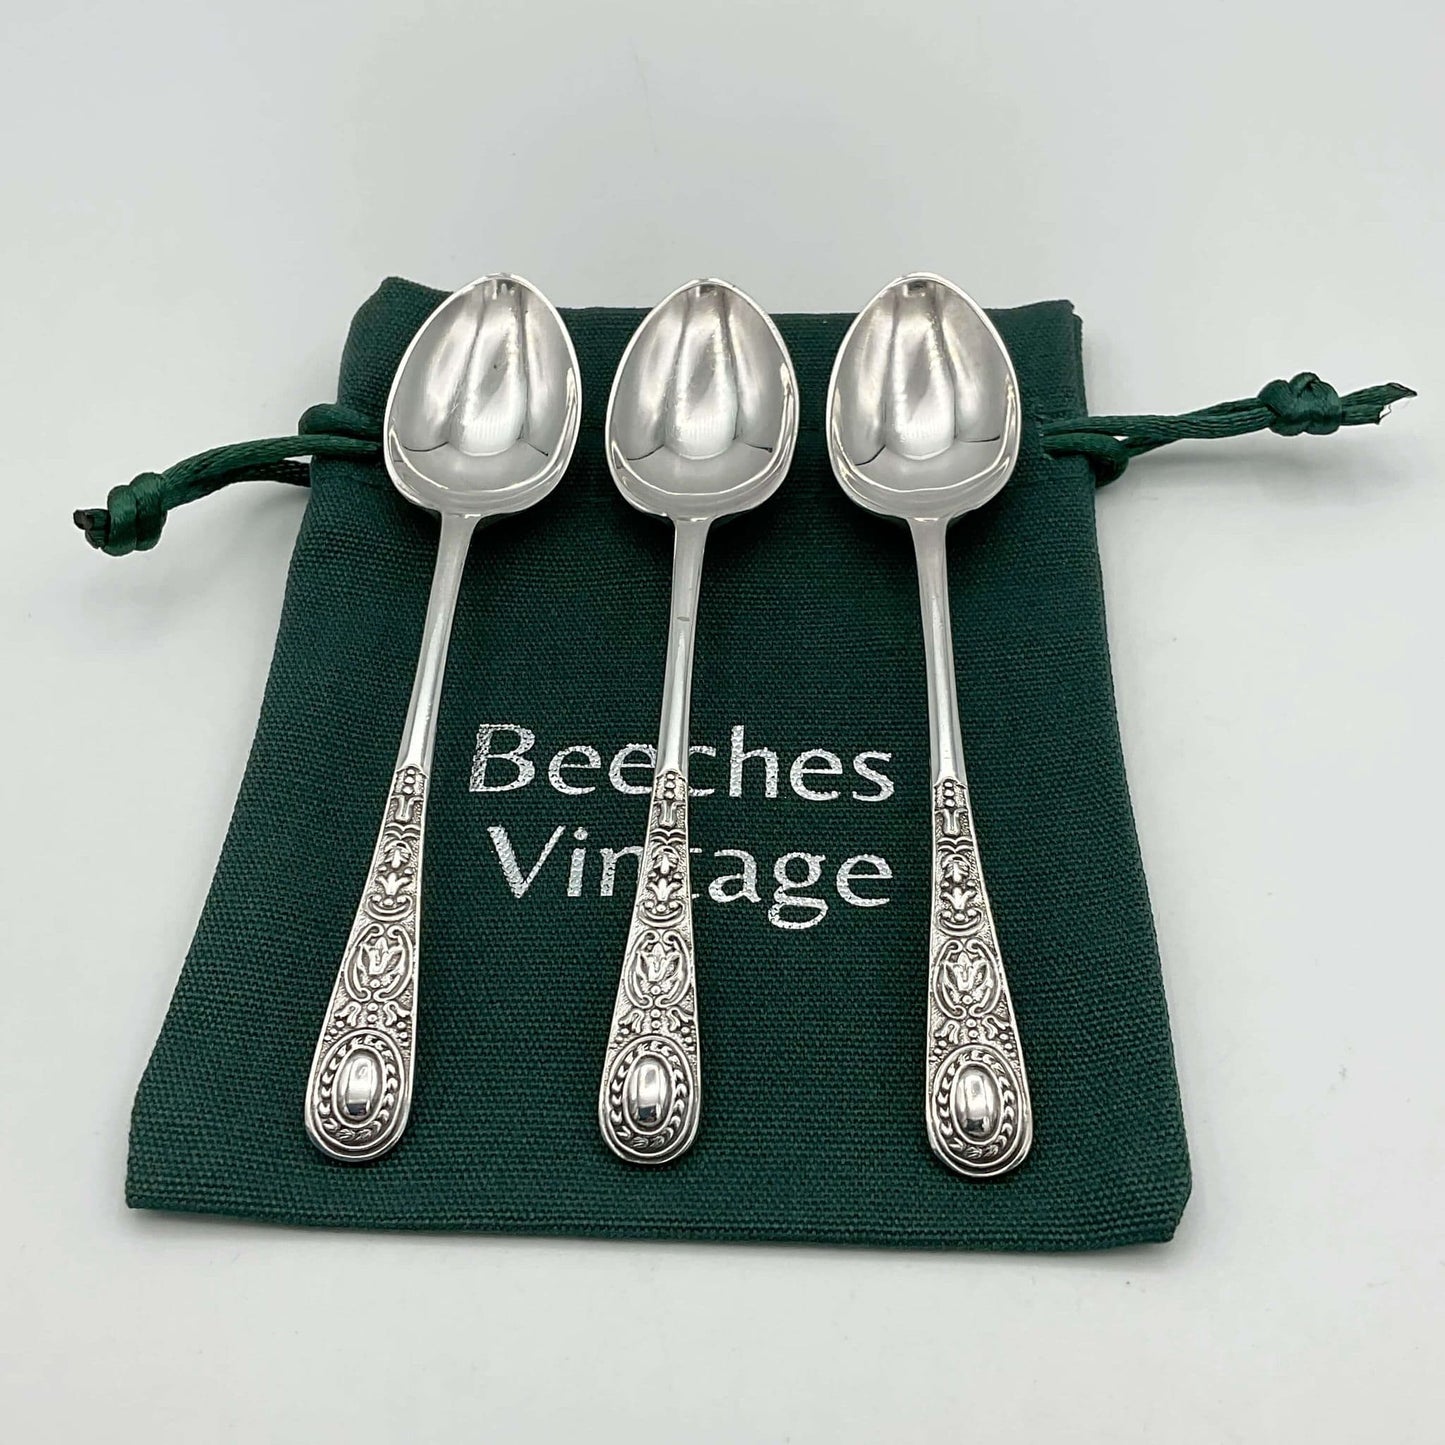 Antique Victorian Silver Plated Coffee Spoons